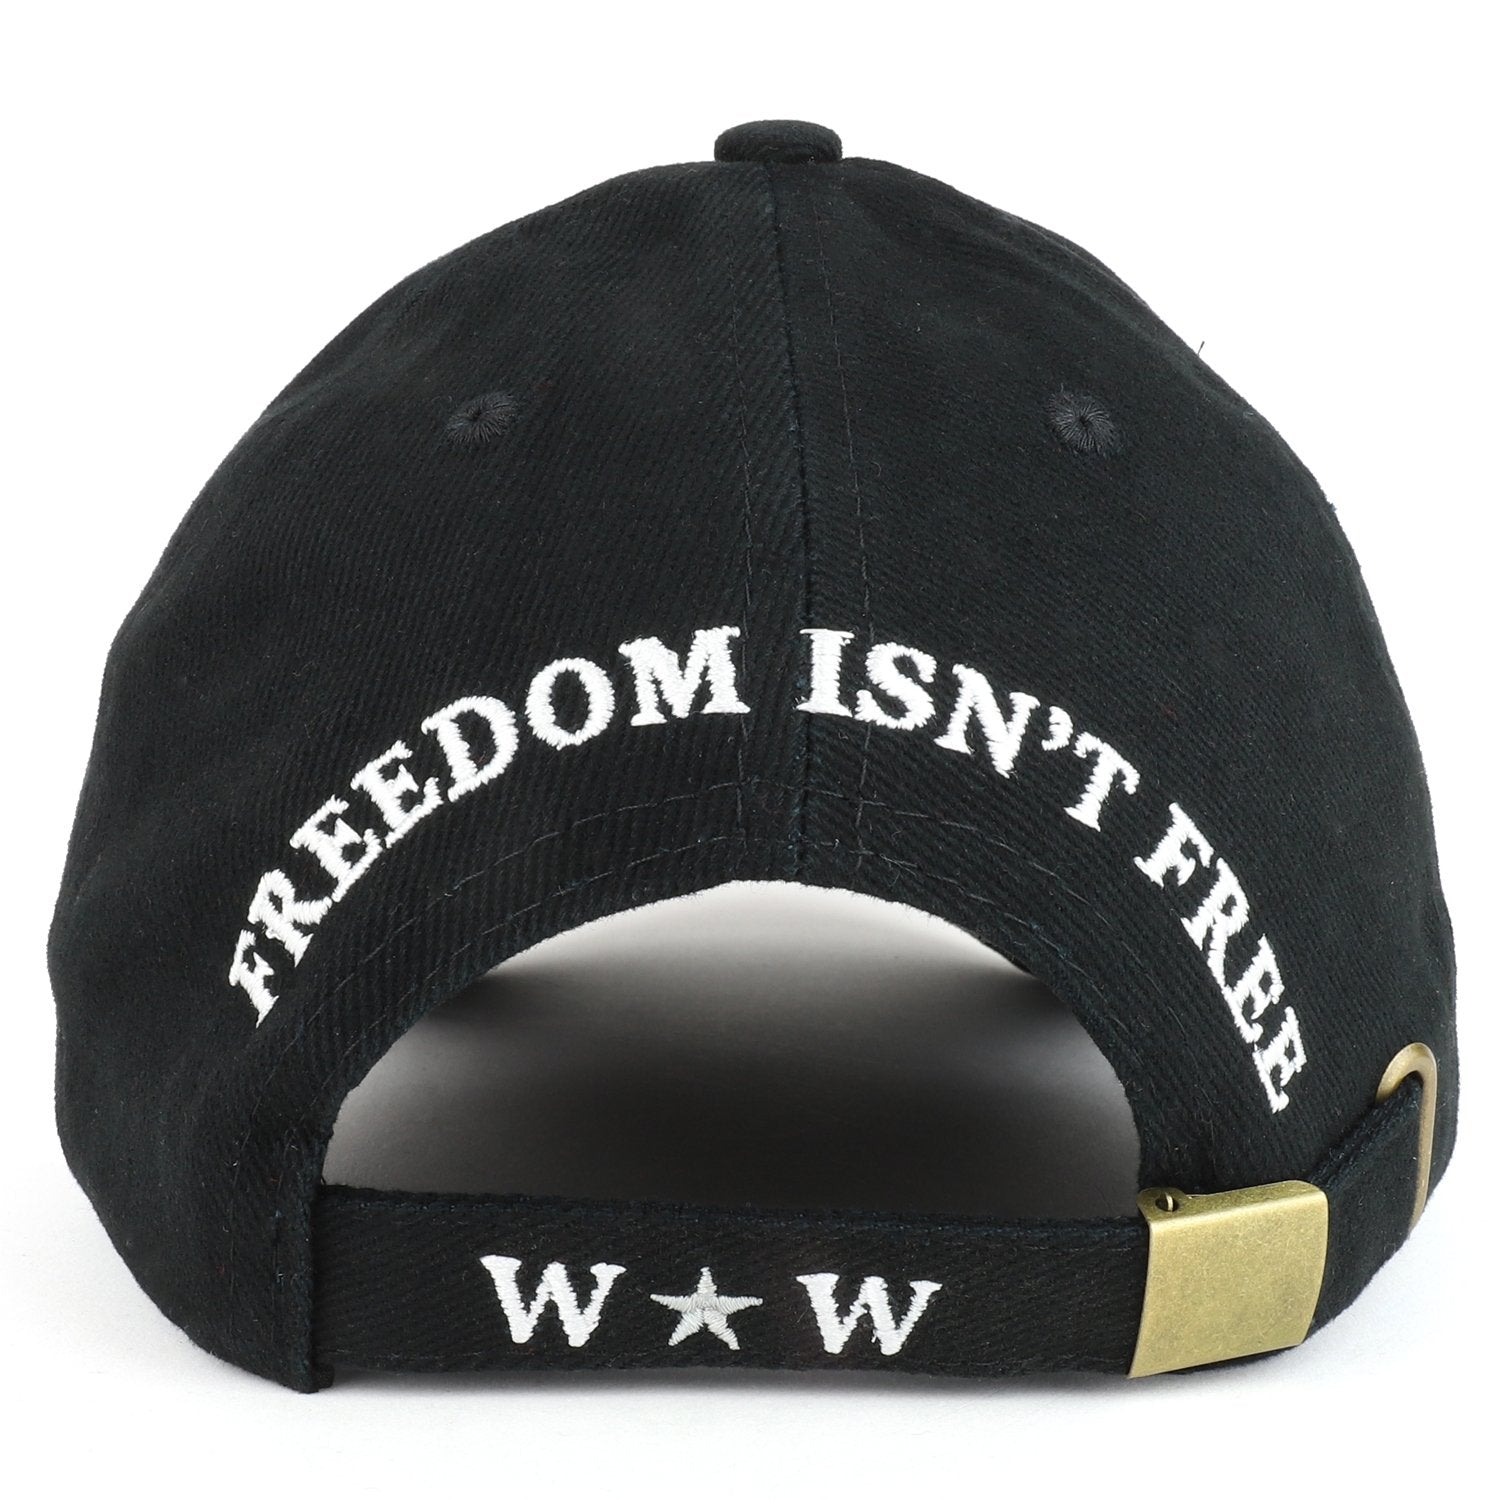 Armycrew Wounded Warrior Heroism Honor Sacrifice Embroidered Structured Baseball Cap